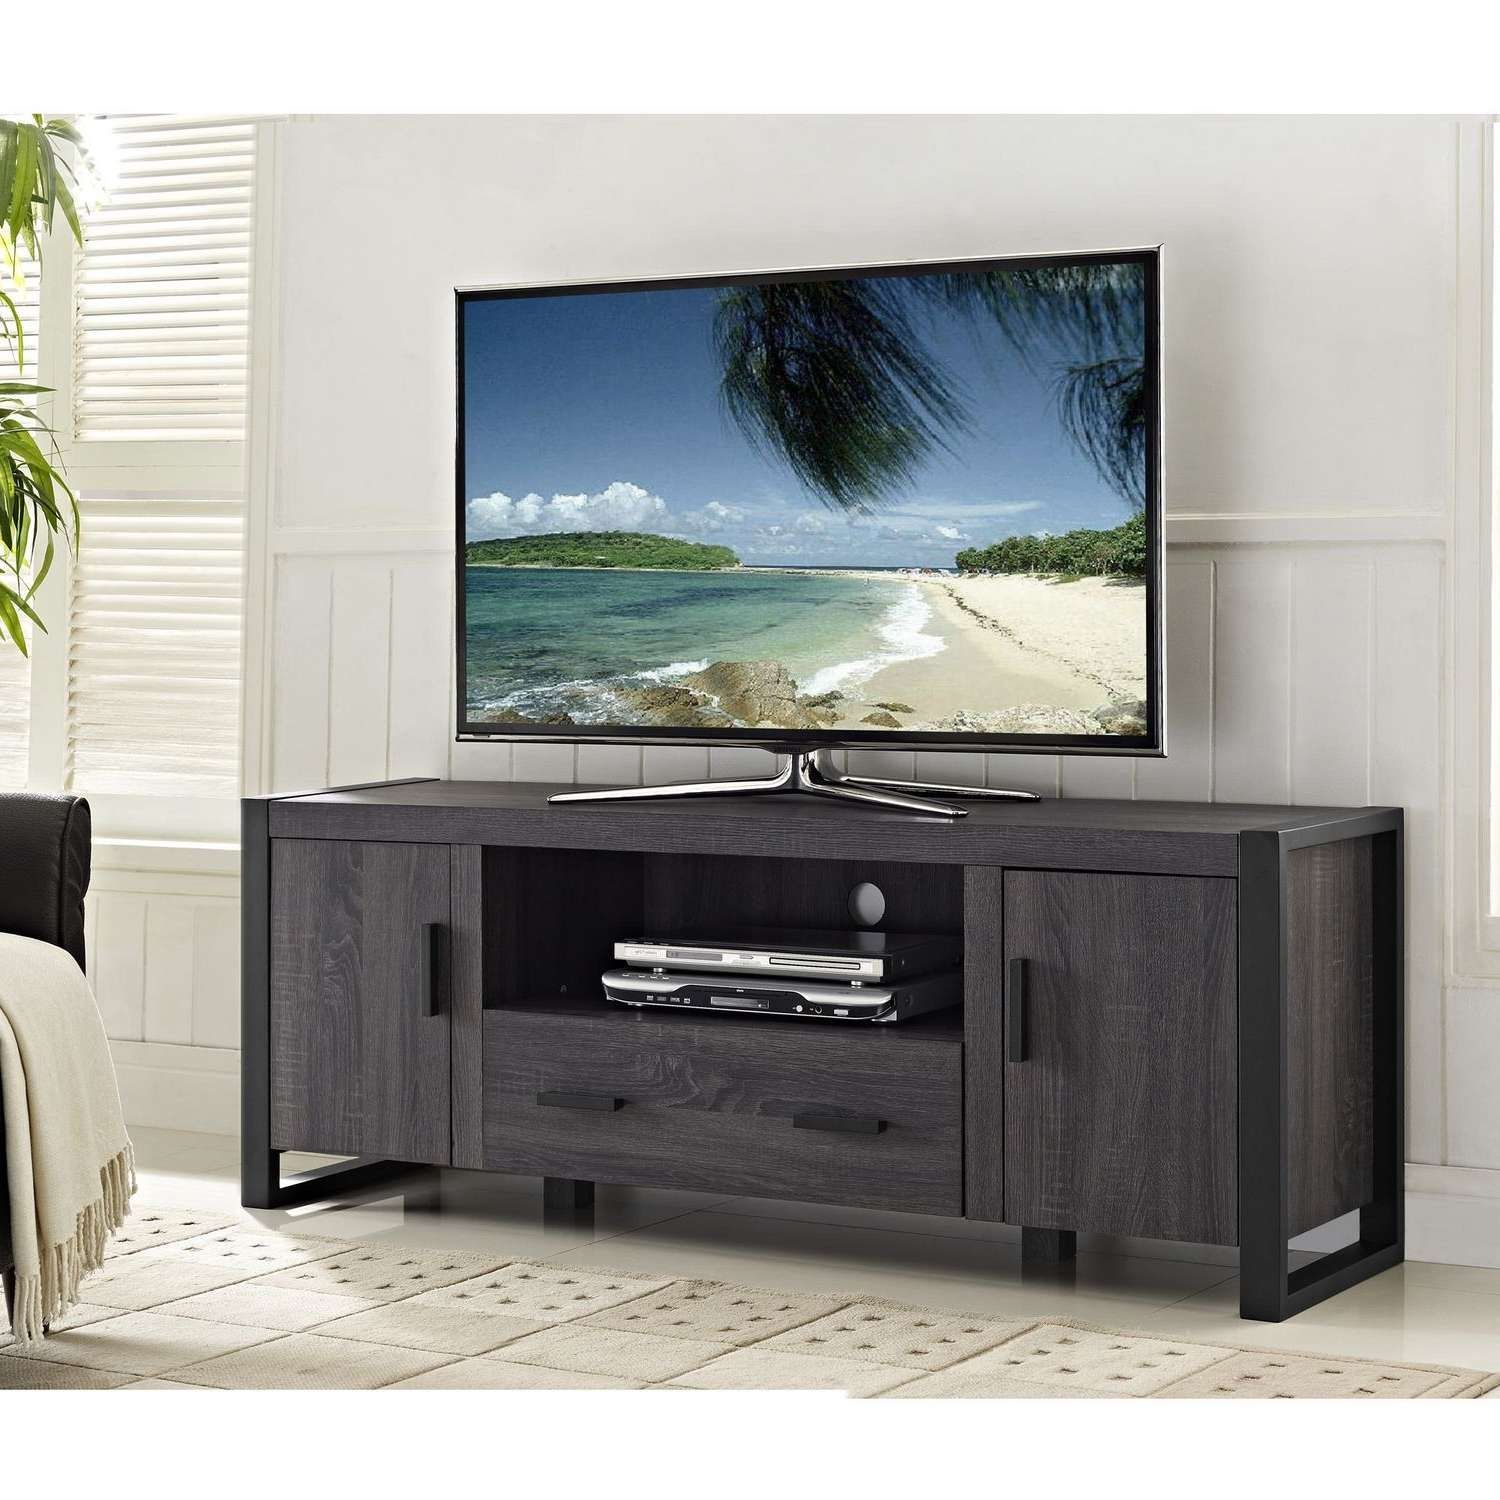 We Furniture 60" Grey Wood Tv Stand Console | Walmart Canada Pertaining To Wooden Tv Stands (View 15 of 15)